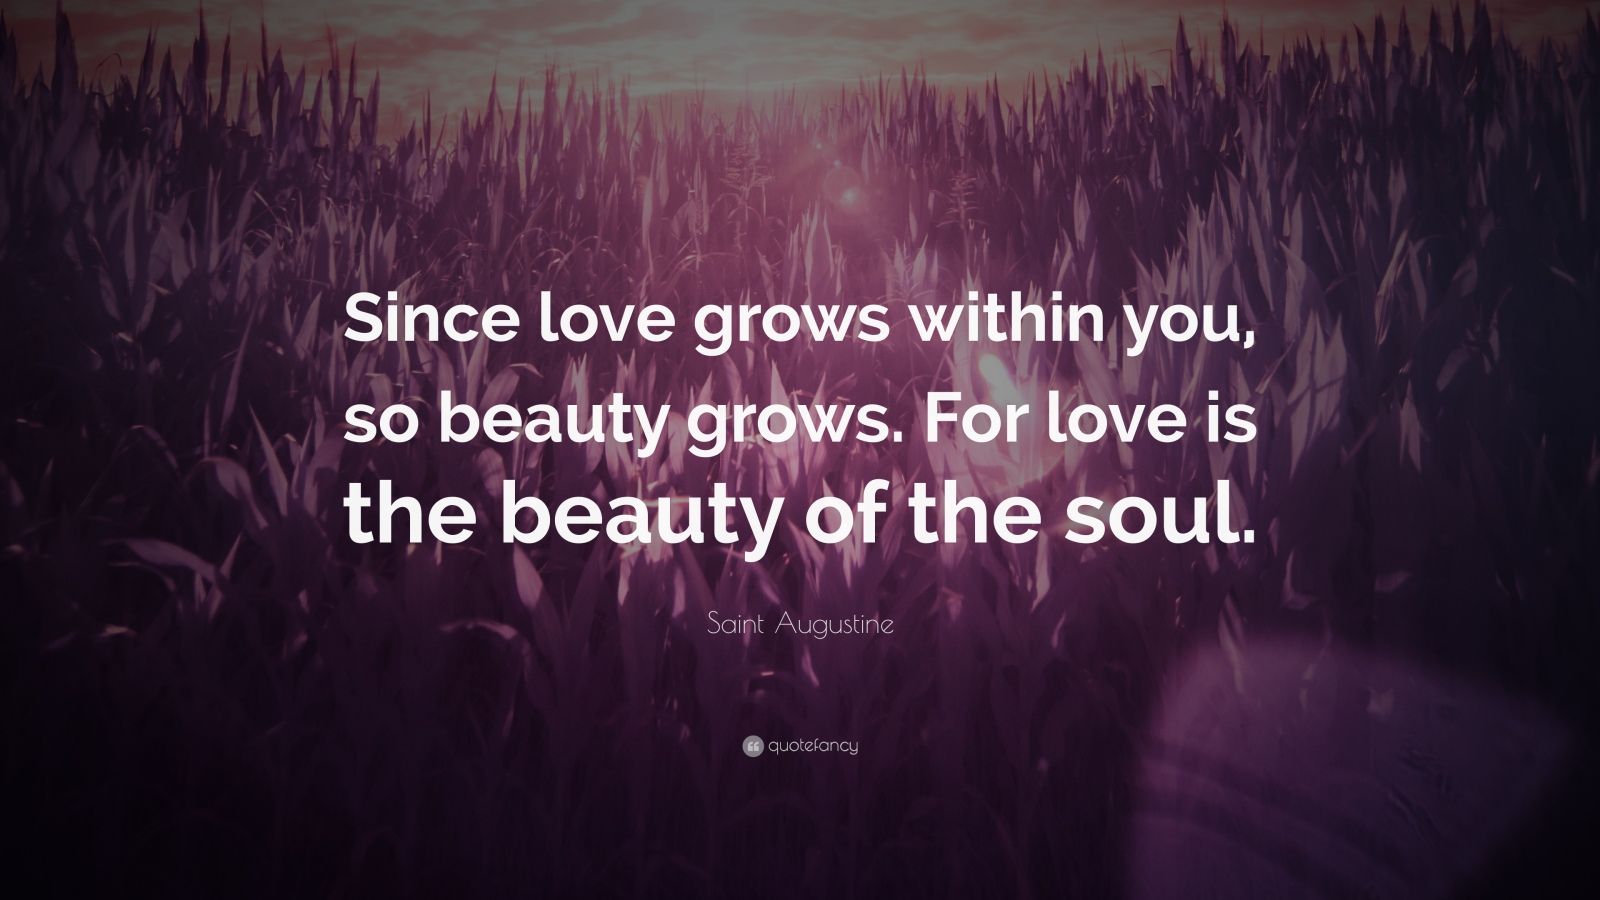 Saint Augustine Quote: "Since love grows within you, so ...